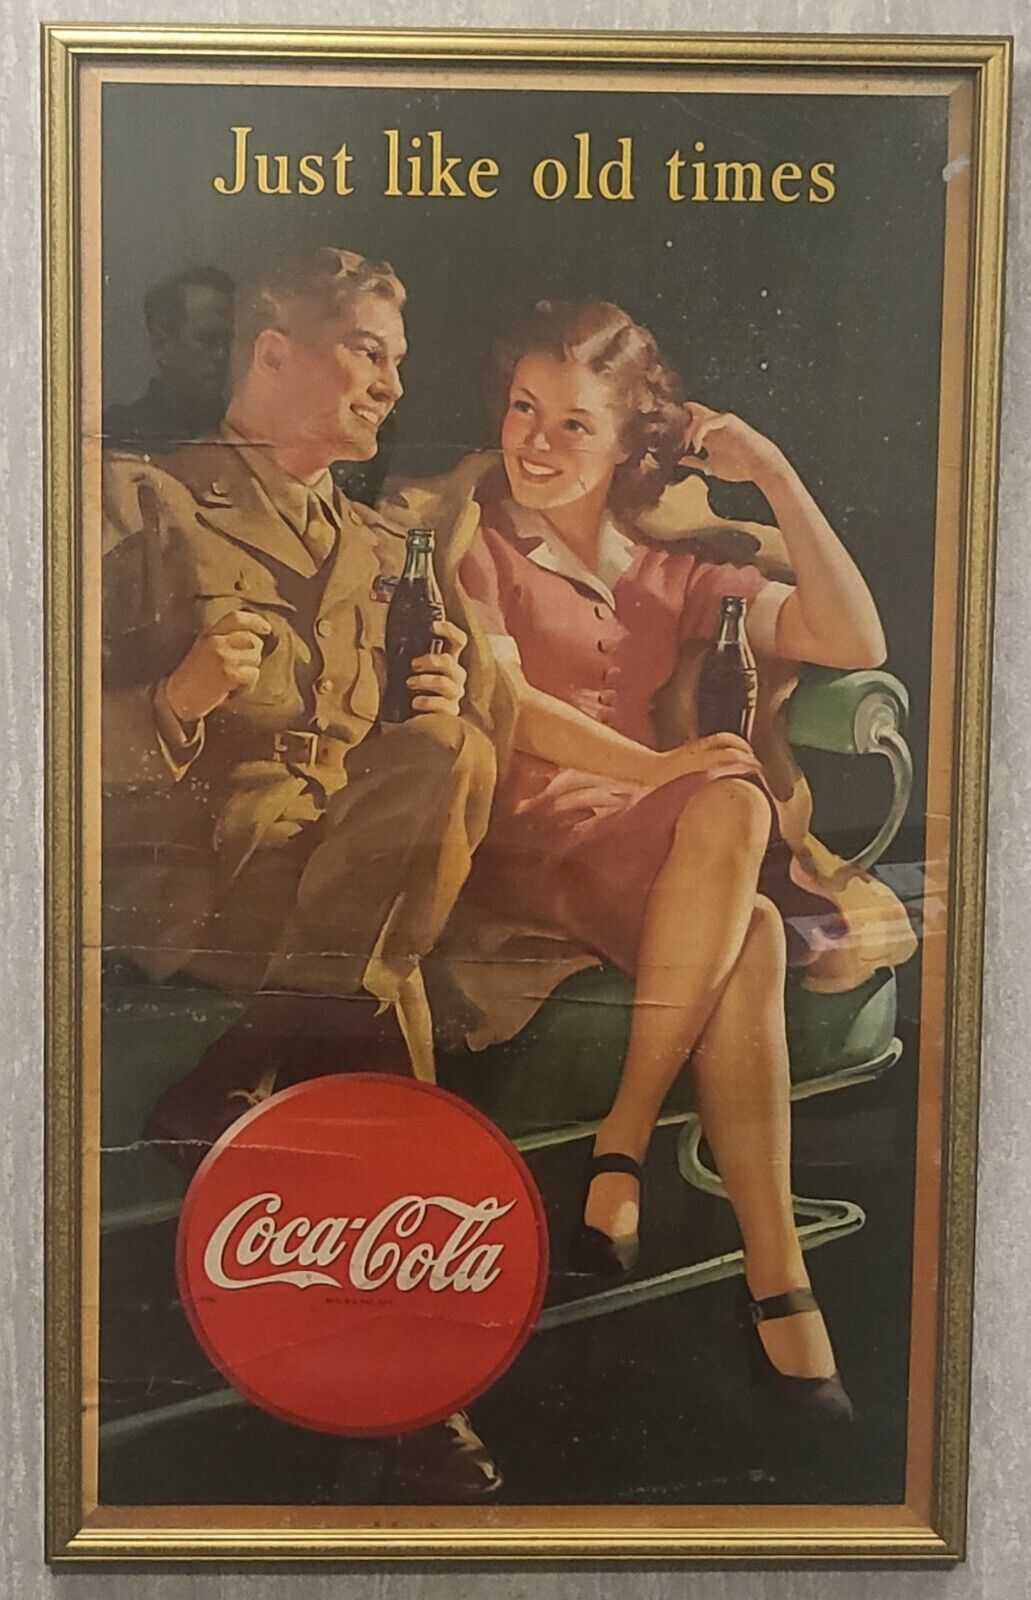 COCA COLA WW2 “JUST LIKE OLD TIMES” 1944 /1945 ADVERTISING POSTER { LARGE }